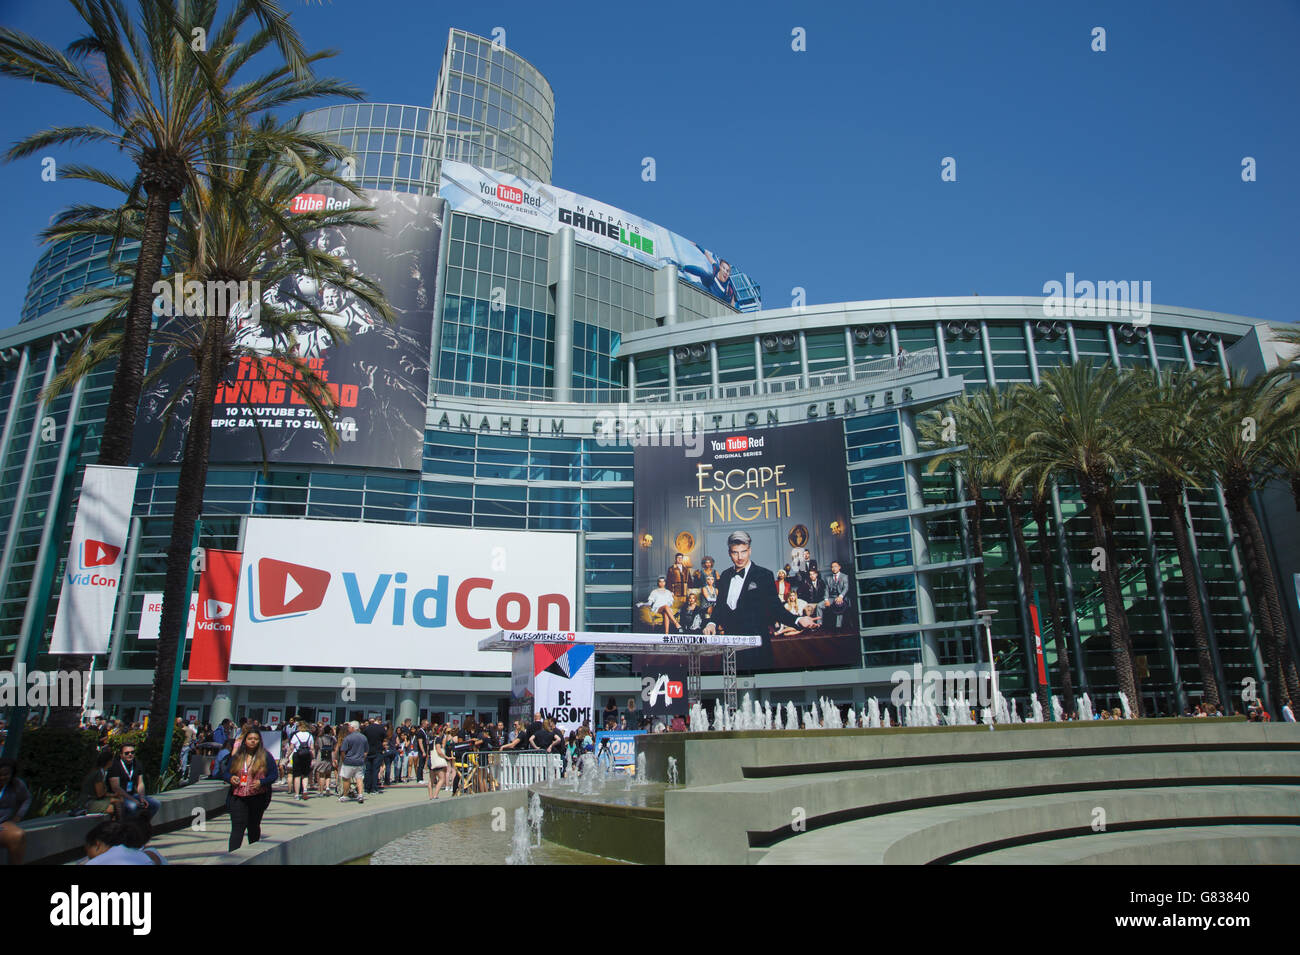 VidCon conference for YouTube creators, influencers, industry experts and fans at the Anaheim Convention Center in United States Stock Photo